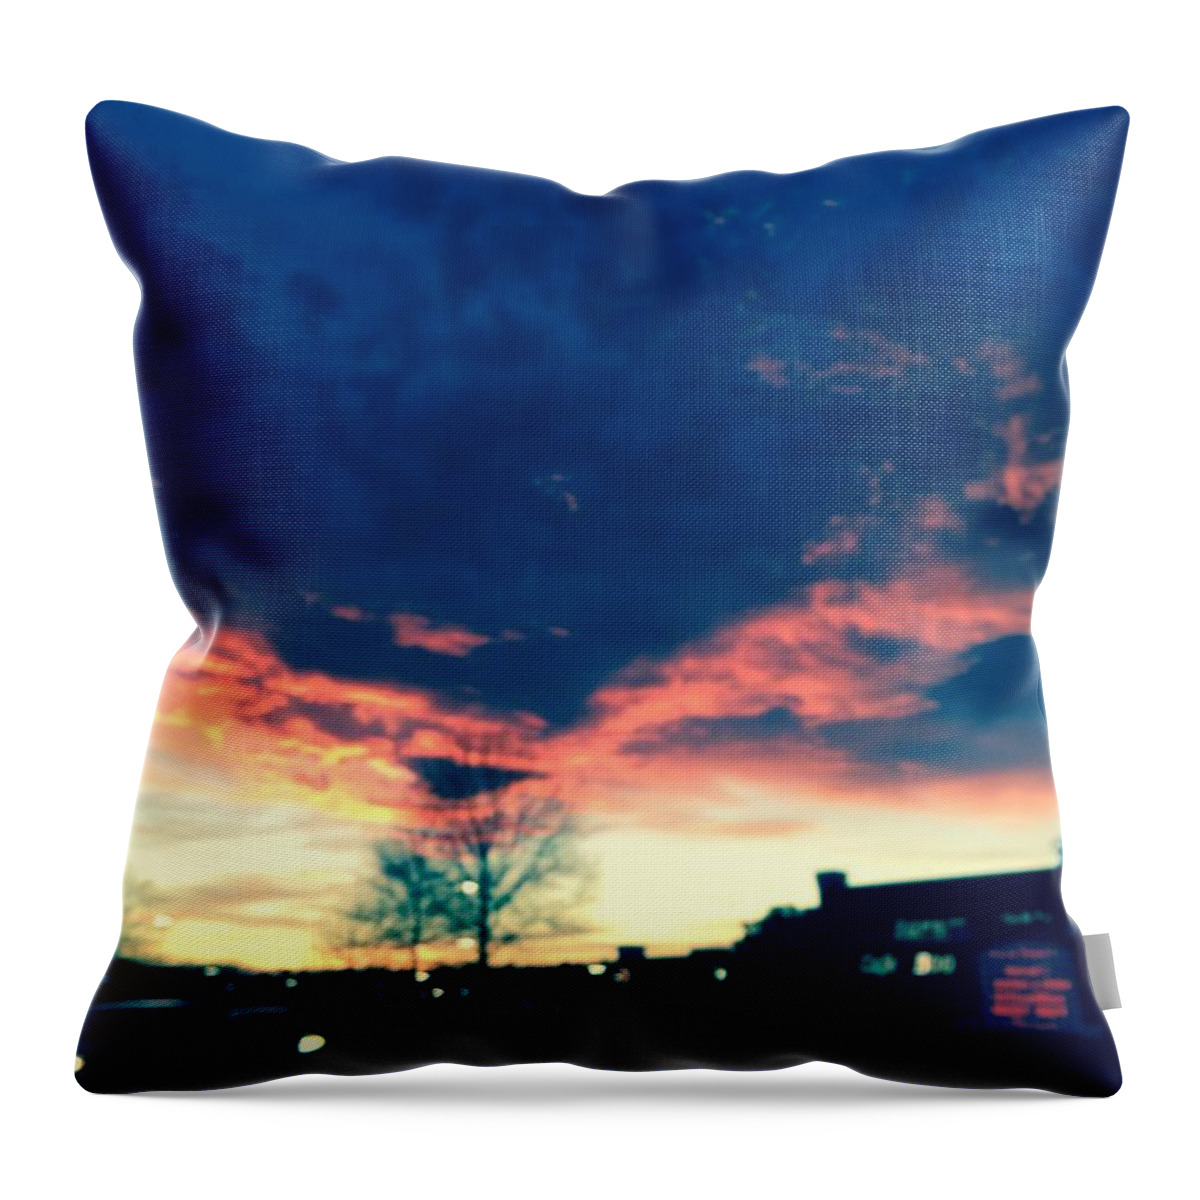 Sunset Throw Pillow featuring the painting Dense Sunset by Angela Annas